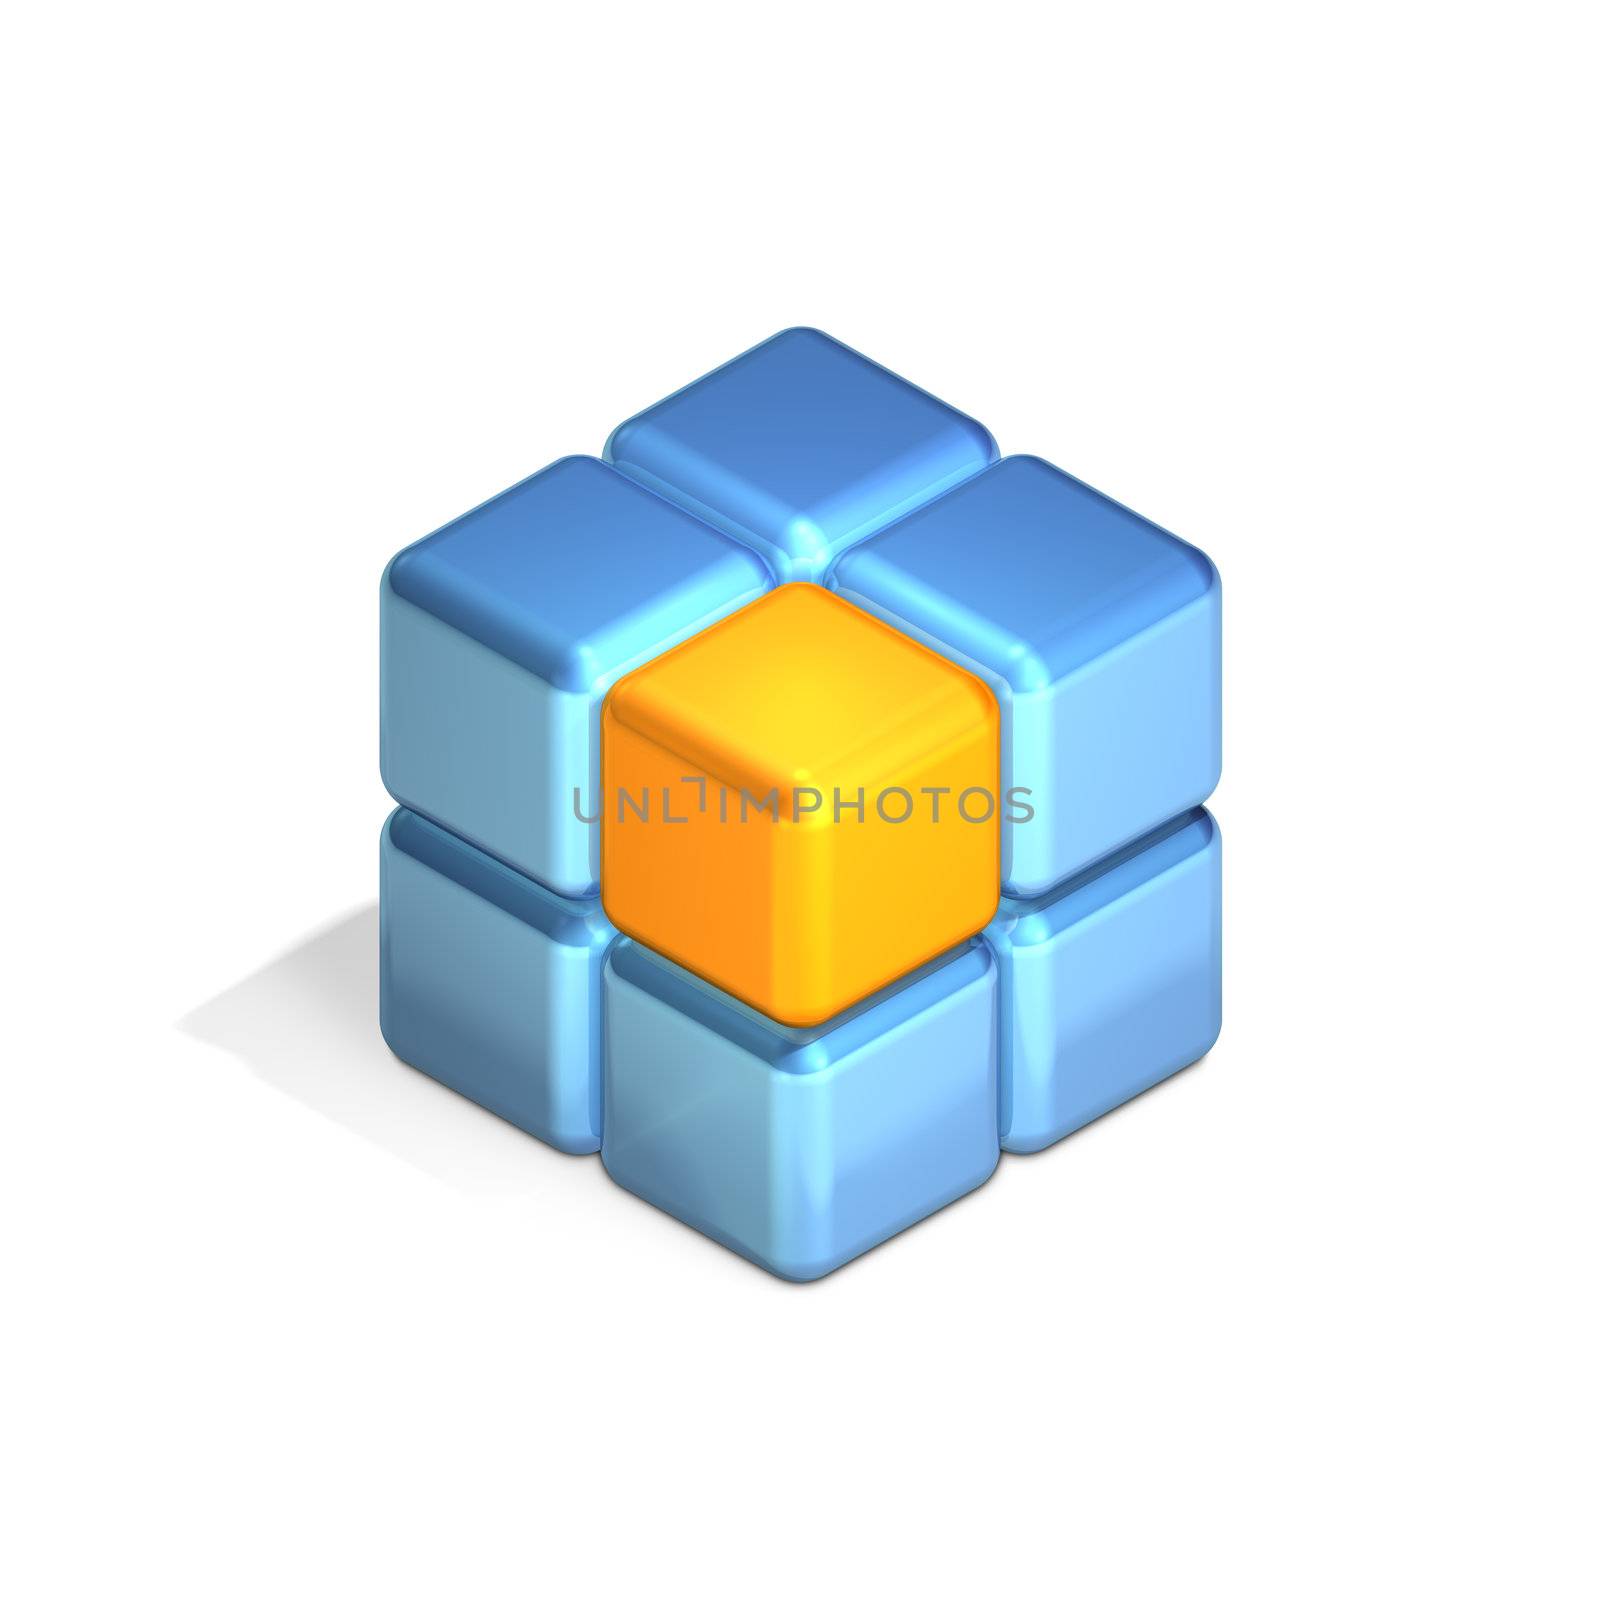 Eight Cubes in Three Dimensional Isometric Perspective (jpeg file has clipping path)